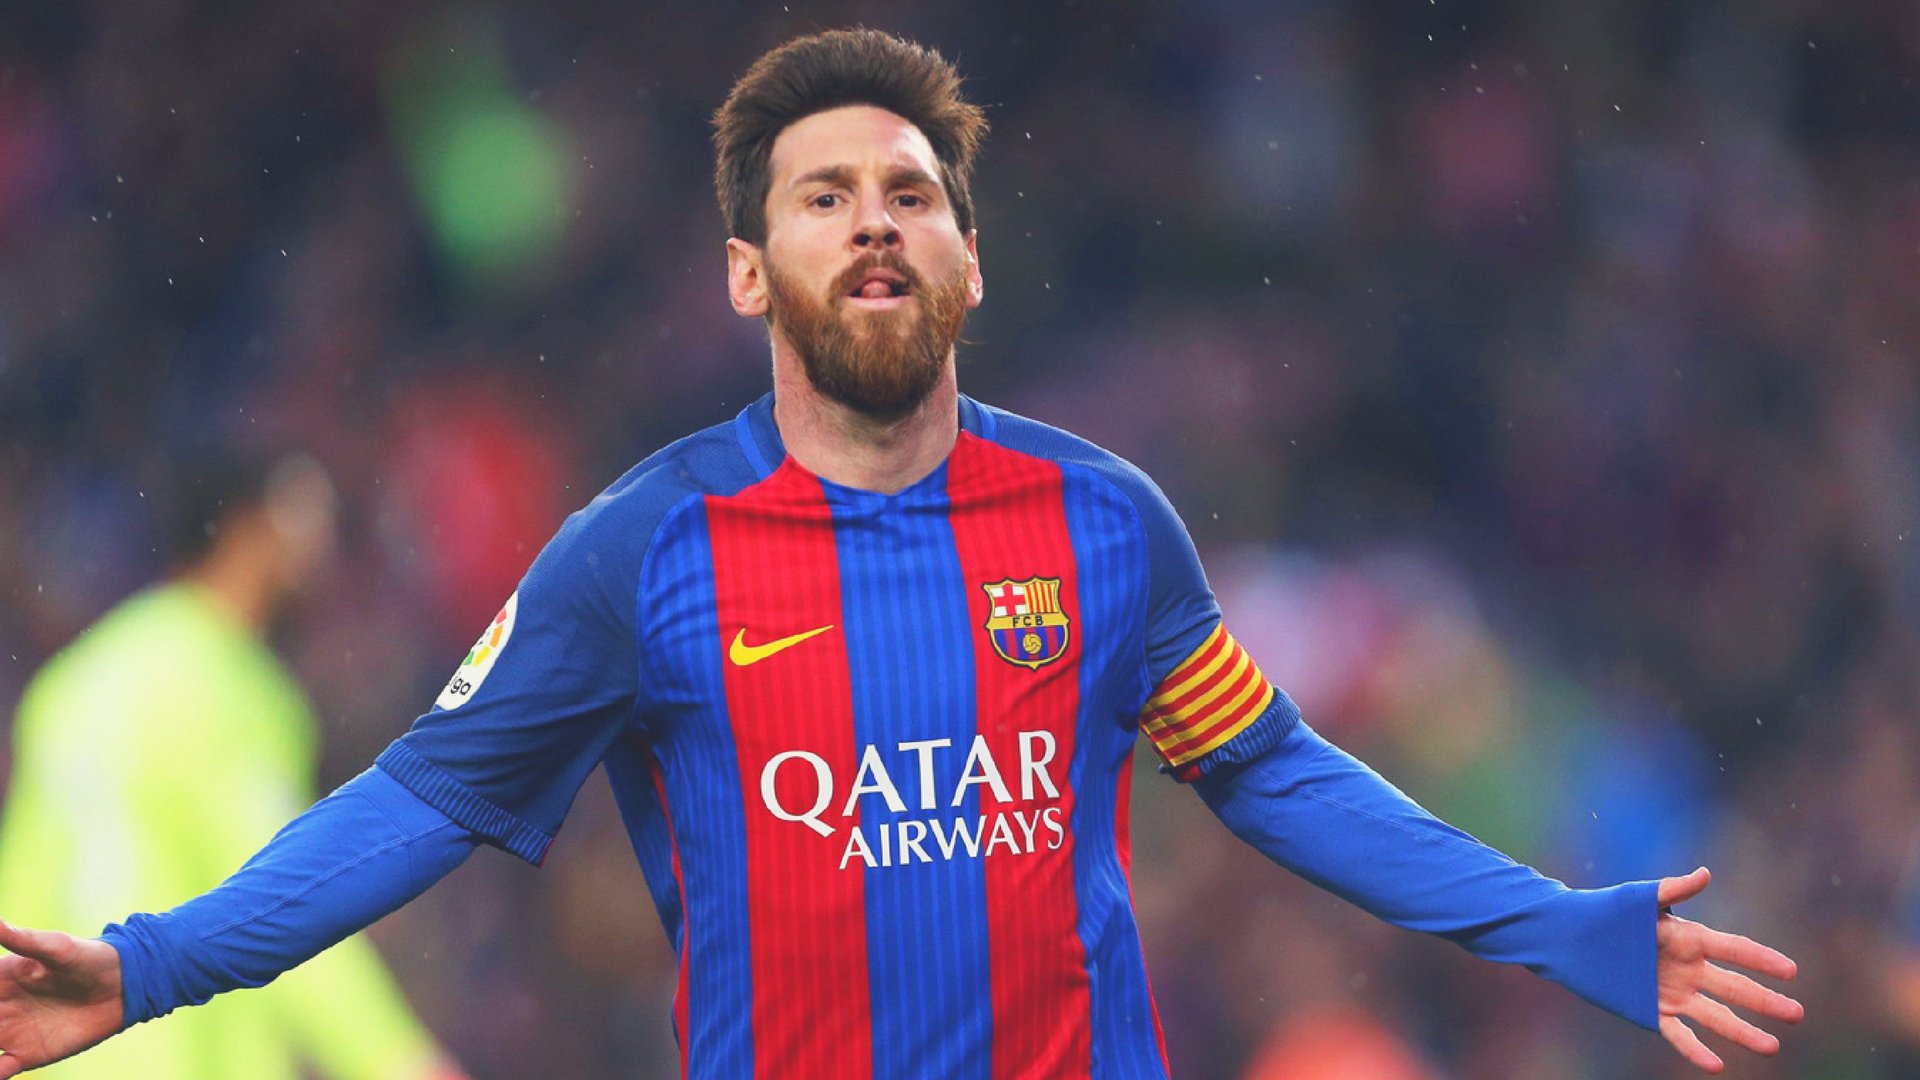 Lionel Messi Wallpapers Download High Quality HD Image of Messi